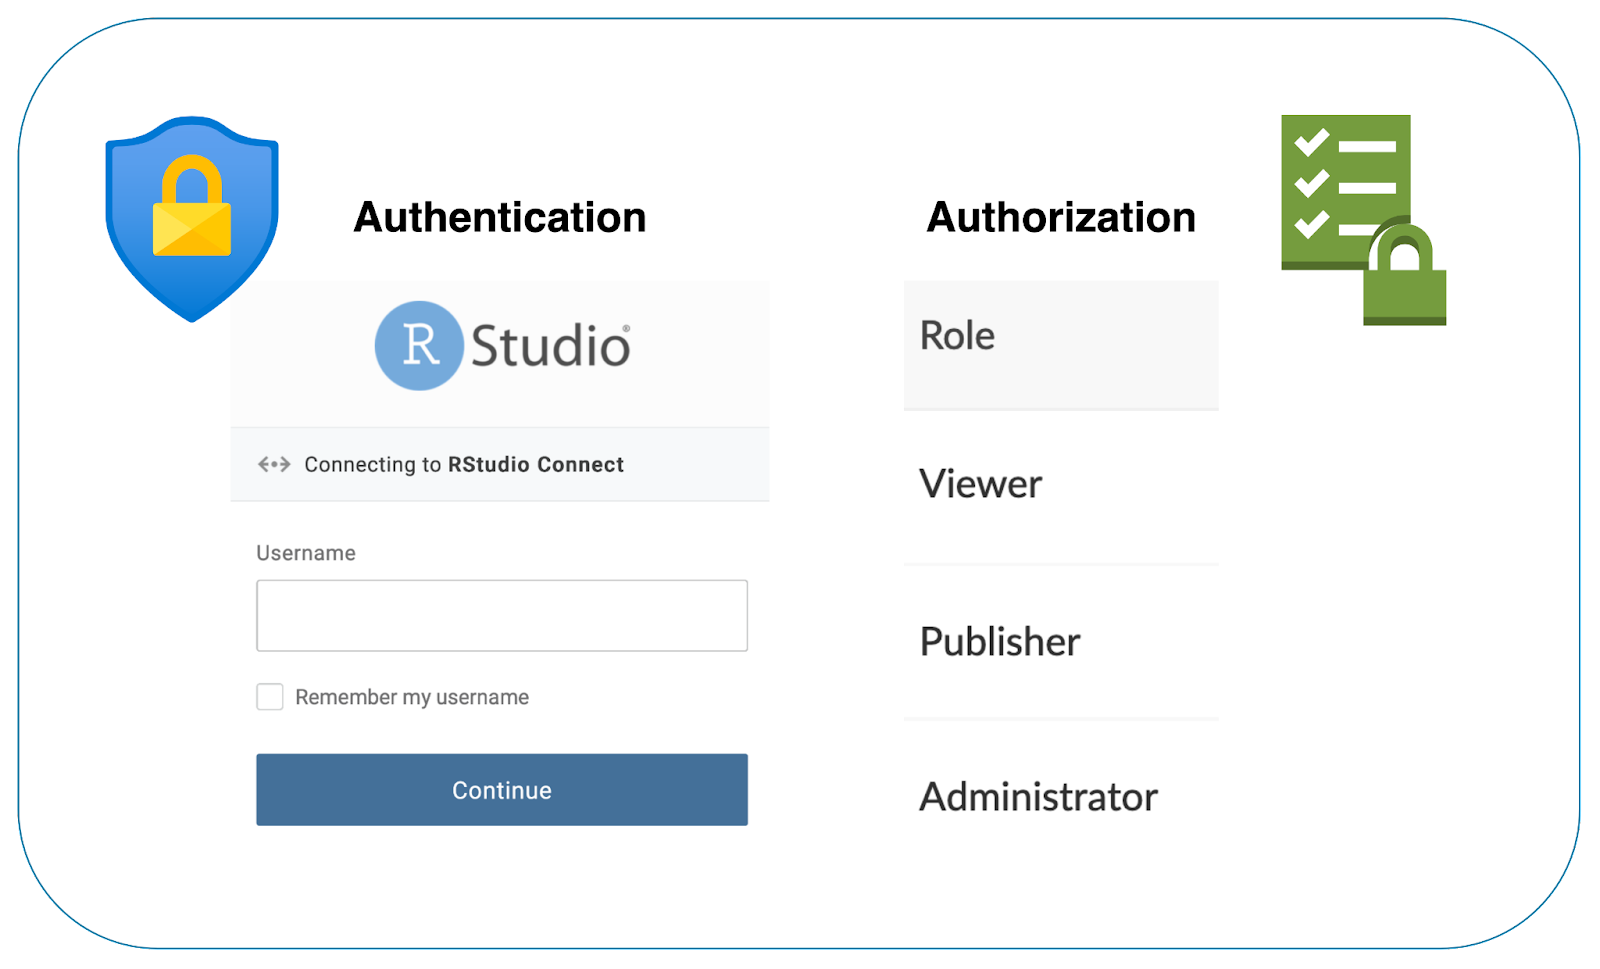 User login and role assignment showing difference between authentication and authorization in RStudio Connect